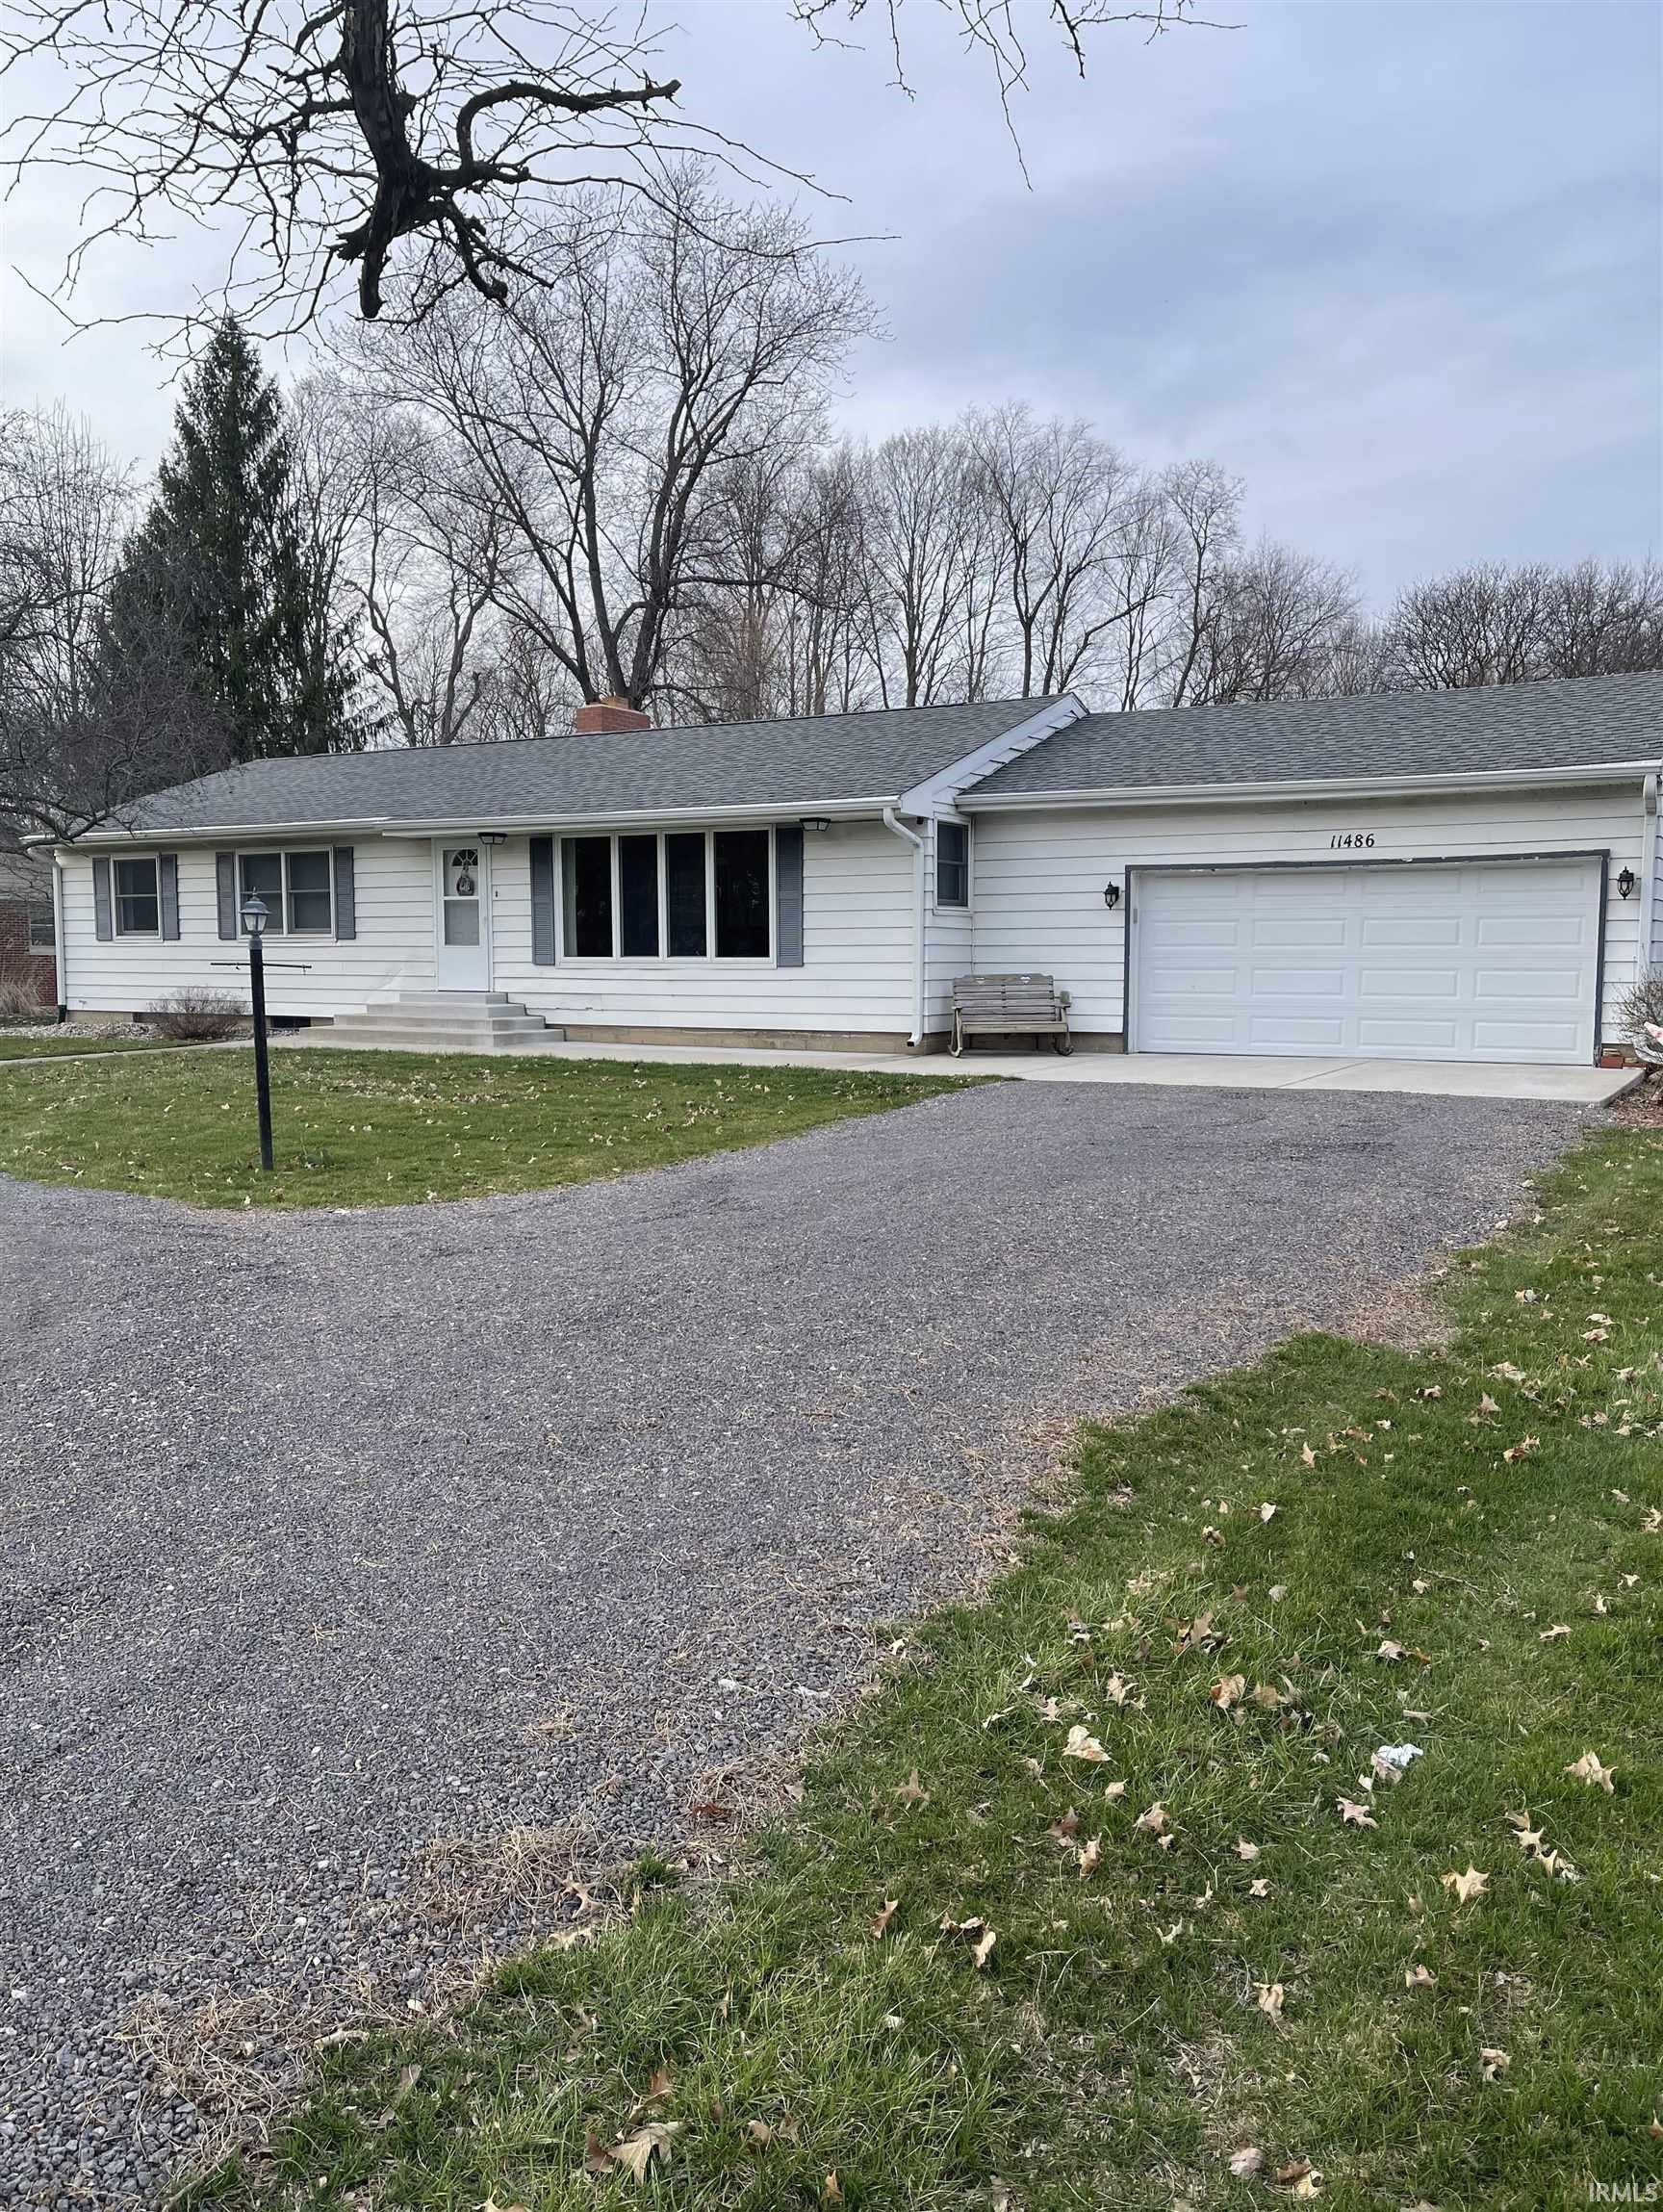 11486 9A Road, Plymouth, IN 